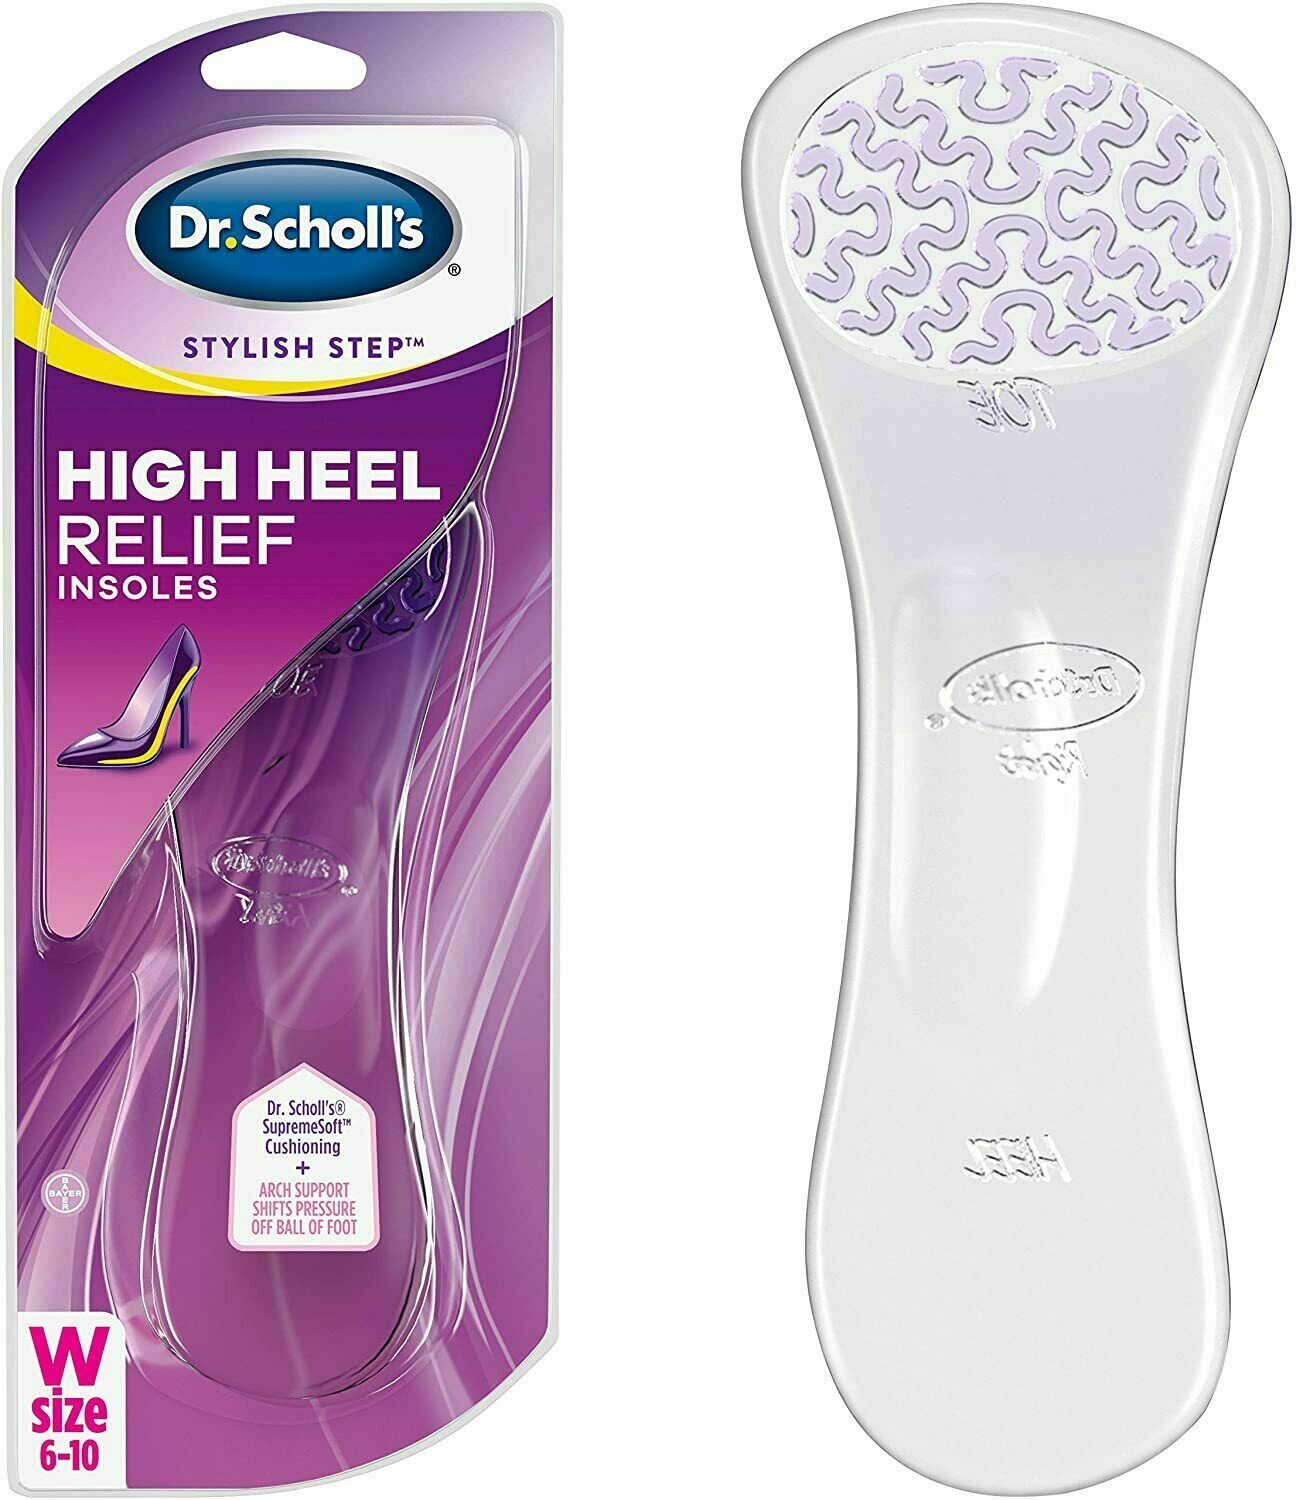 Dr. Scholl's High Heel Relief Insoles for Women, Shoe inserts (Womens 6-10)